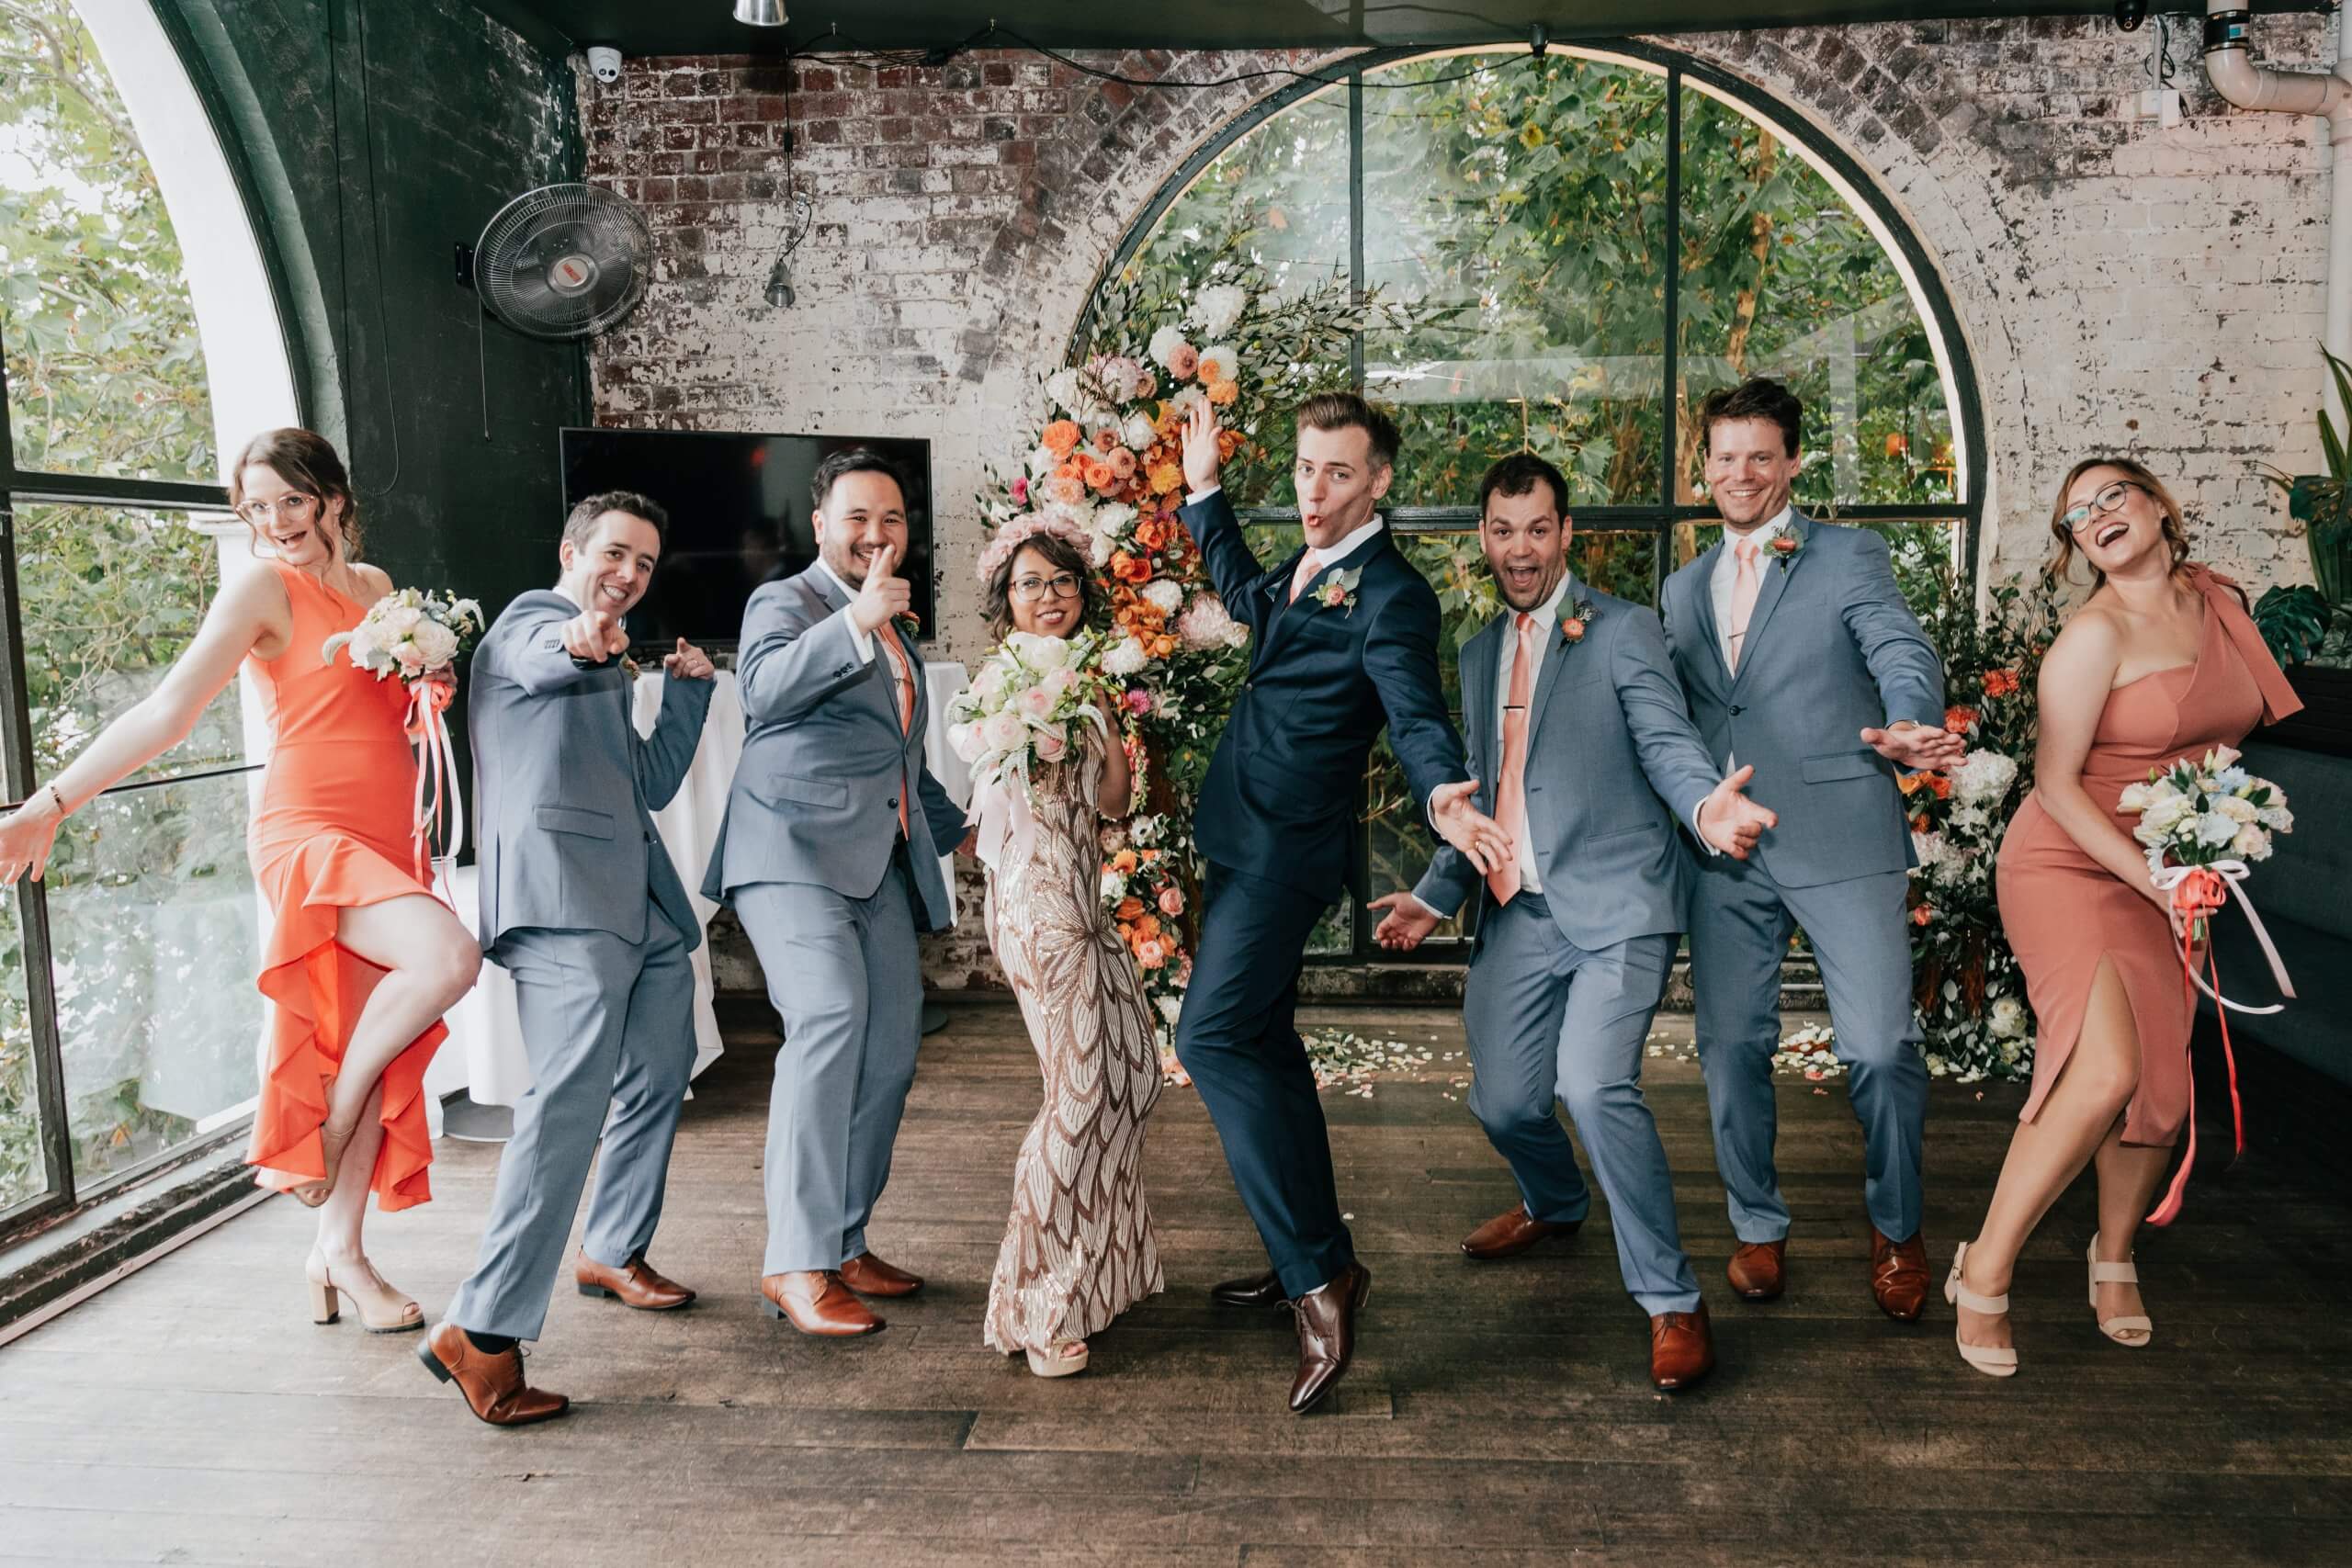 Fun photo of the bridal party as they pose with wacky faces.